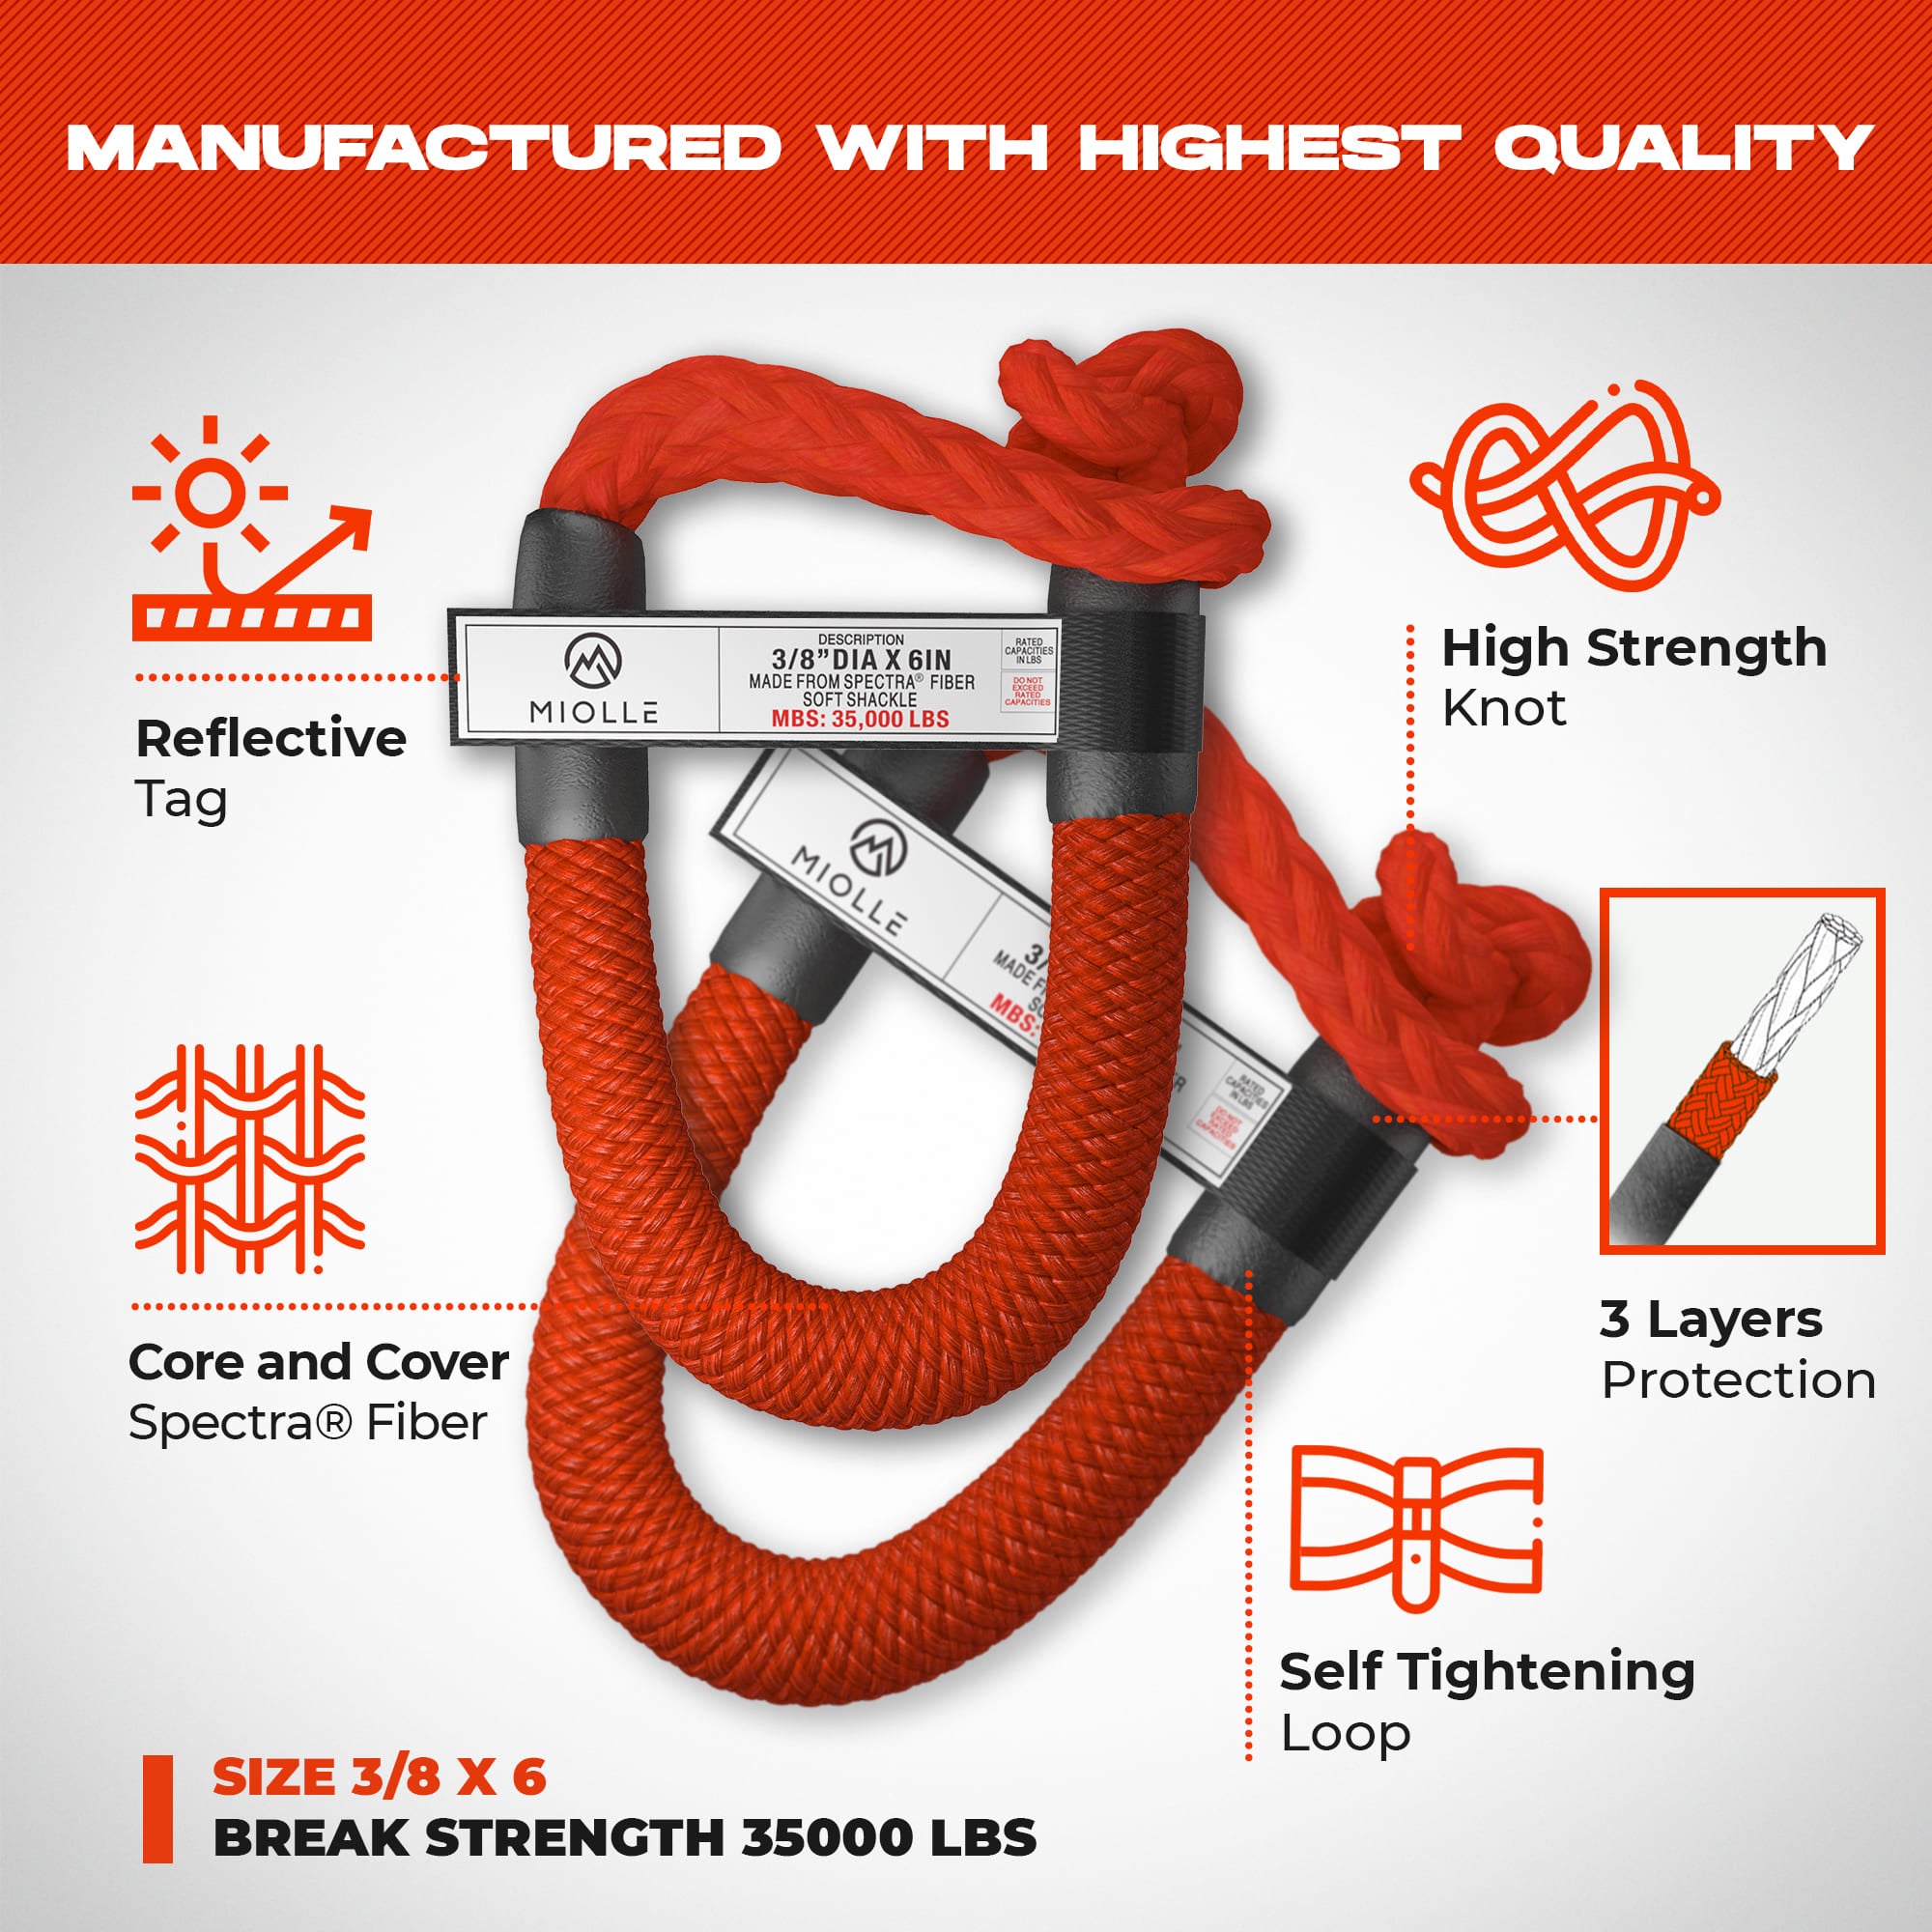 Kinetic Recovery Rope - Miolle 7/8x30' Red (29,300 lbs), with 2 Spect